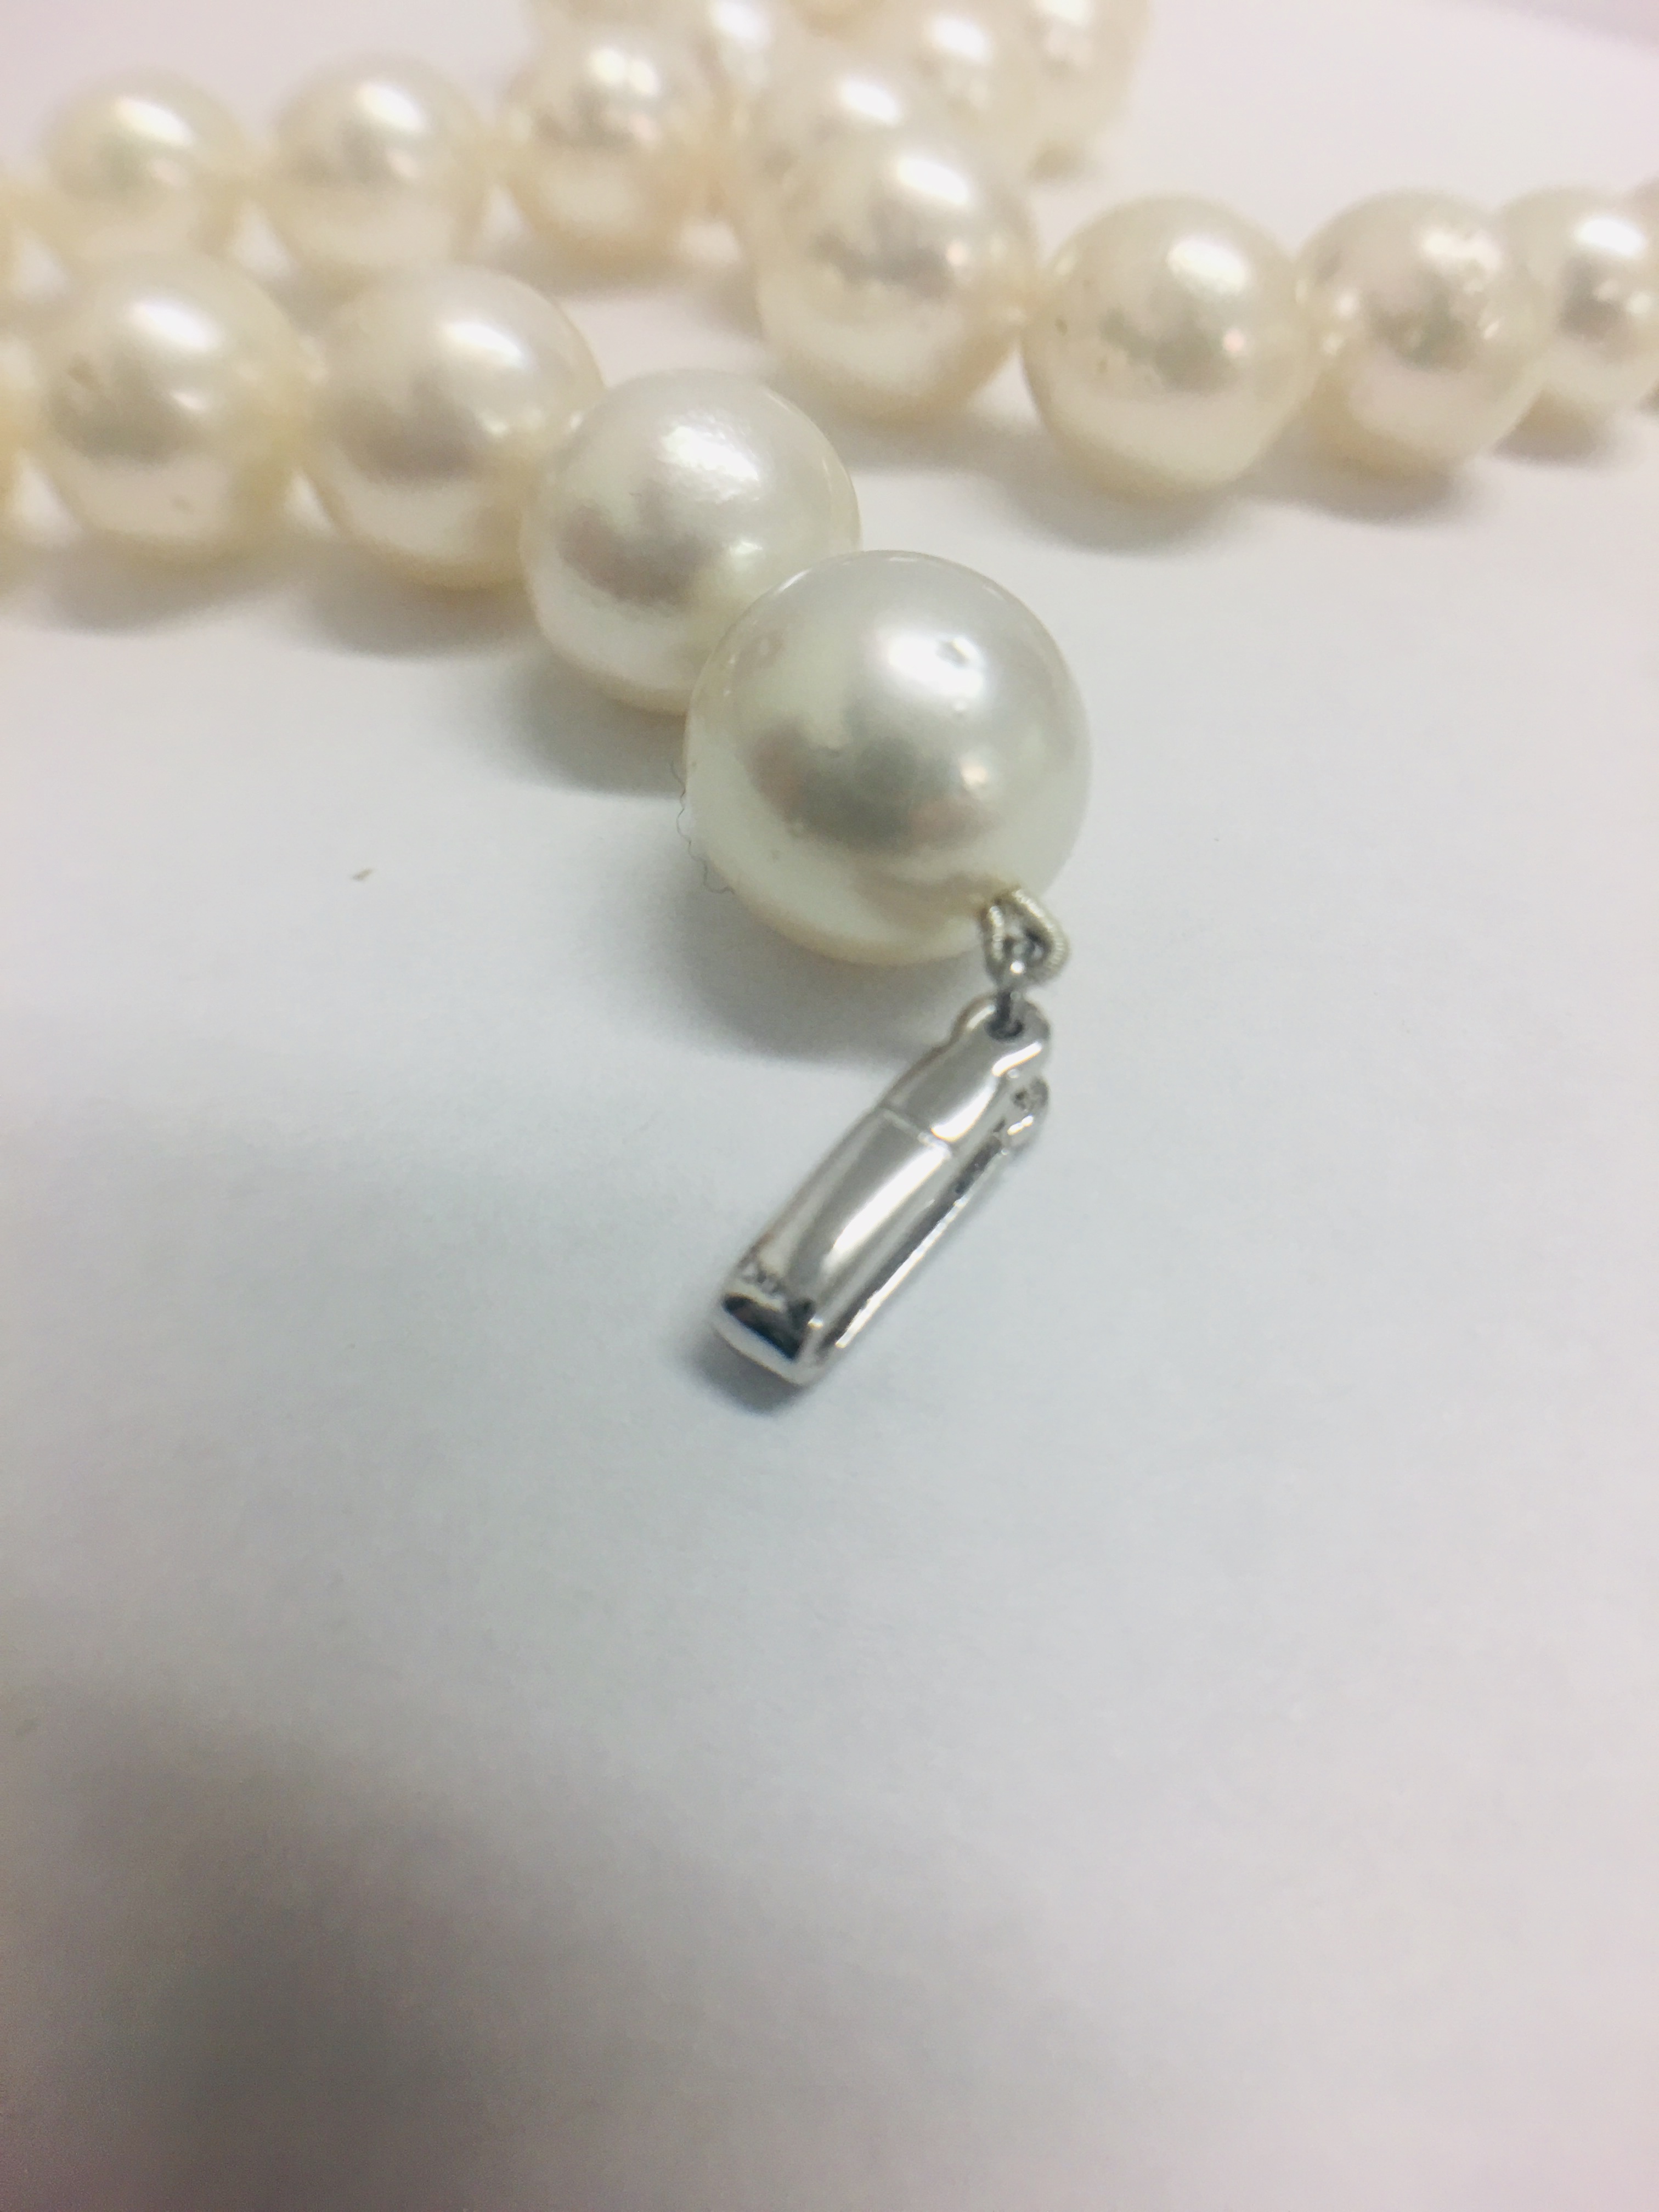 Strand 35 South Sea Pearls With 14Ct White Gold Filagree Style Ball Clasp. - Image 9 of 10